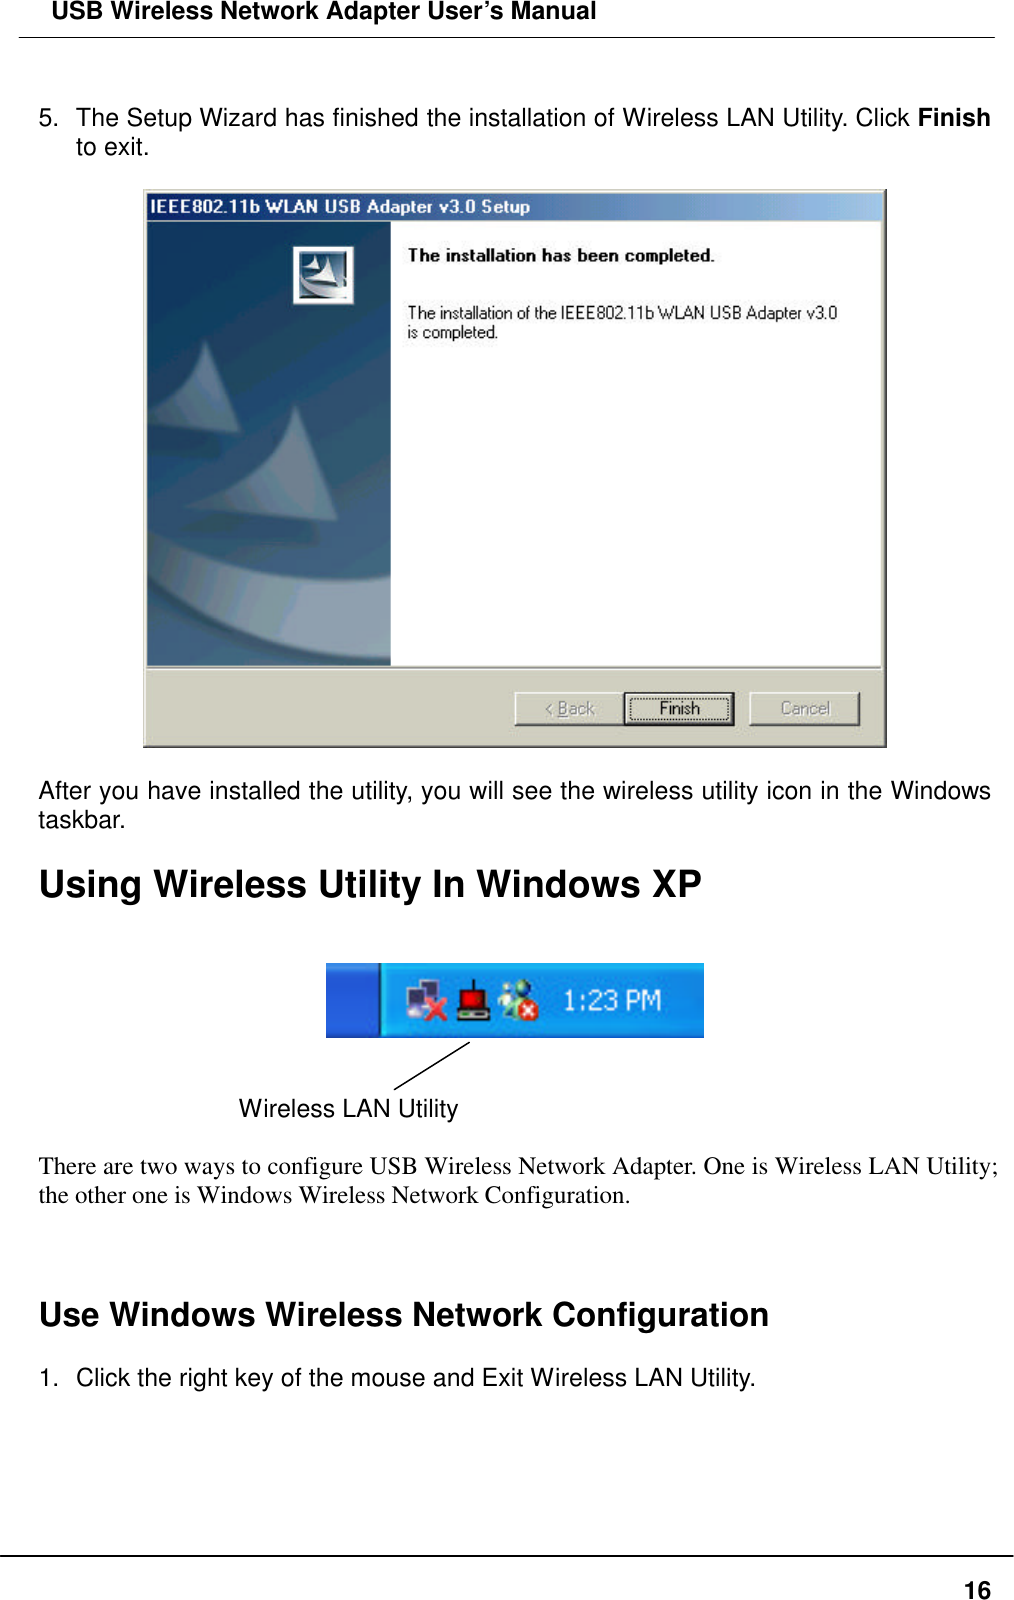  USB Wireless Network Adapter User’s Manual  16 5. The Setup Wizard has finished the installation of Wireless LAN Utility. Click Finish to exit.      After you have installed the utility, you will see the wireless utility icon in the Windows taskbar.  Using Wireless Utility In Windows XP      Wireless LAN Utility    There are two ways to configure USB Wireless Network Adapter. One is Wireless LAN Utility; the other one is Windows Wireless Network Configuration.    Use Windows Wireless Network Configuration  1. Click the right key of the mouse and Exit Wireless LAN Utility.  